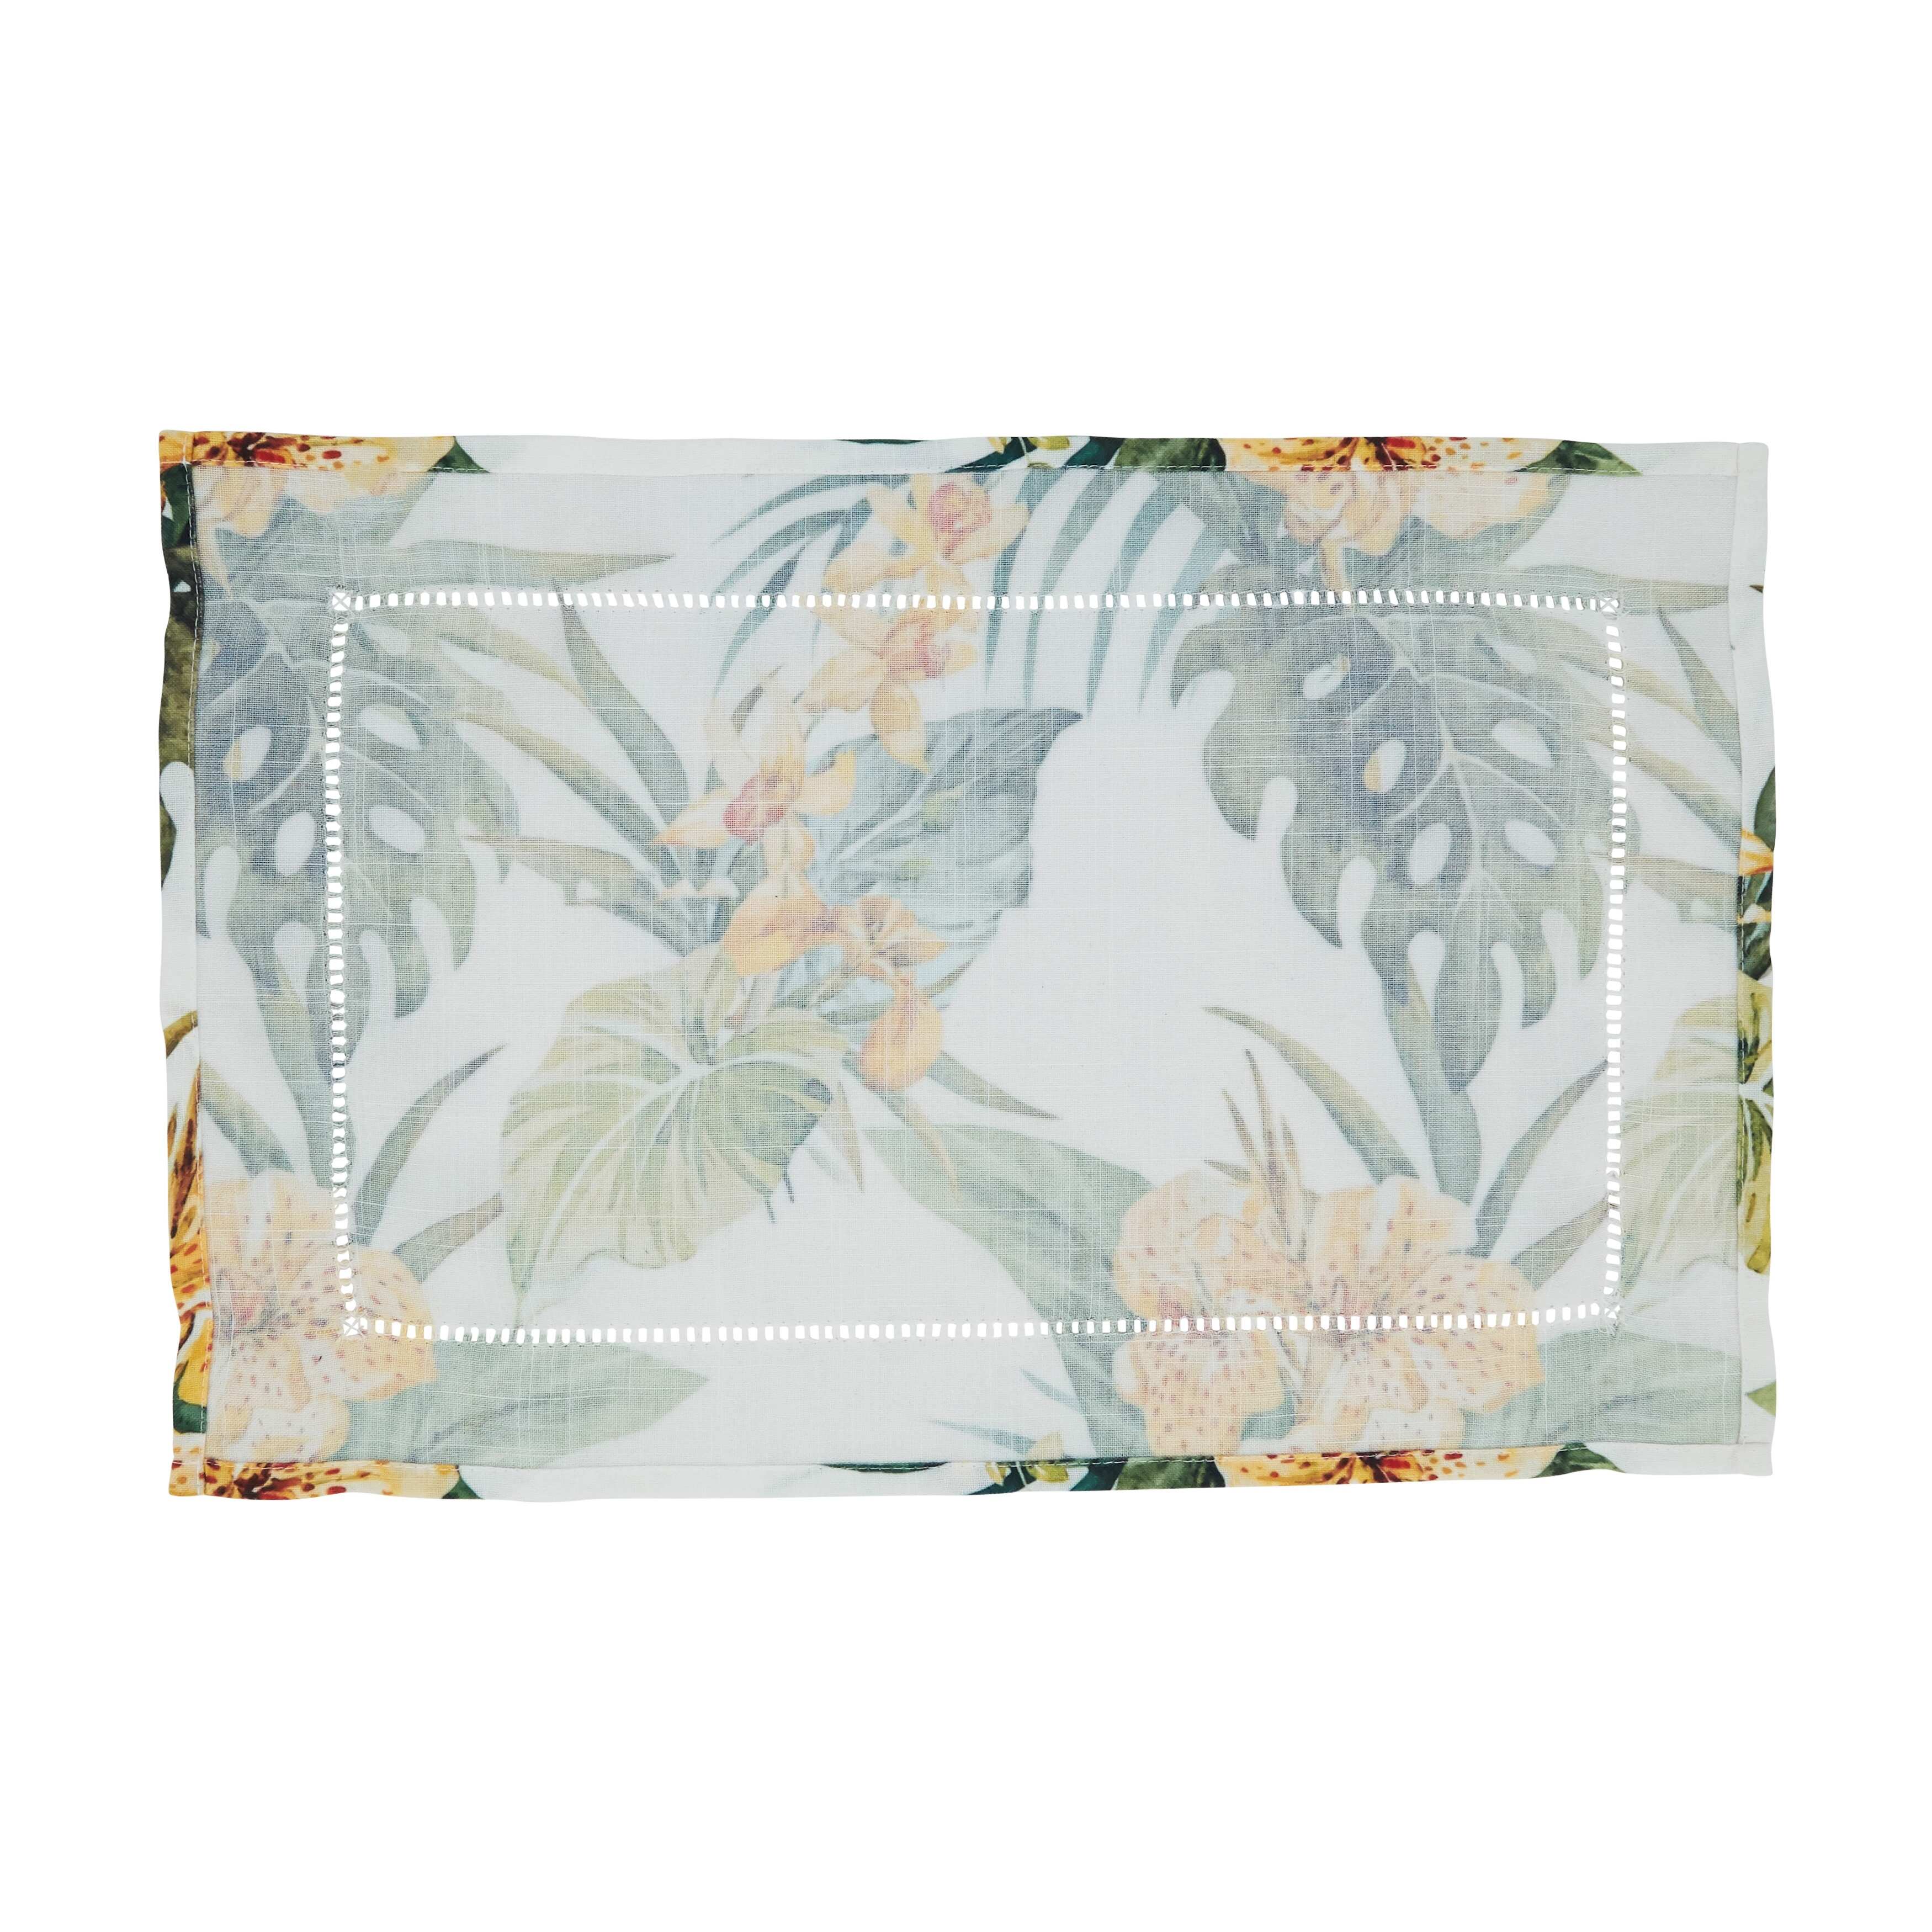 Hemstitch Placemats With Tropical Flower Design (Set of 4)